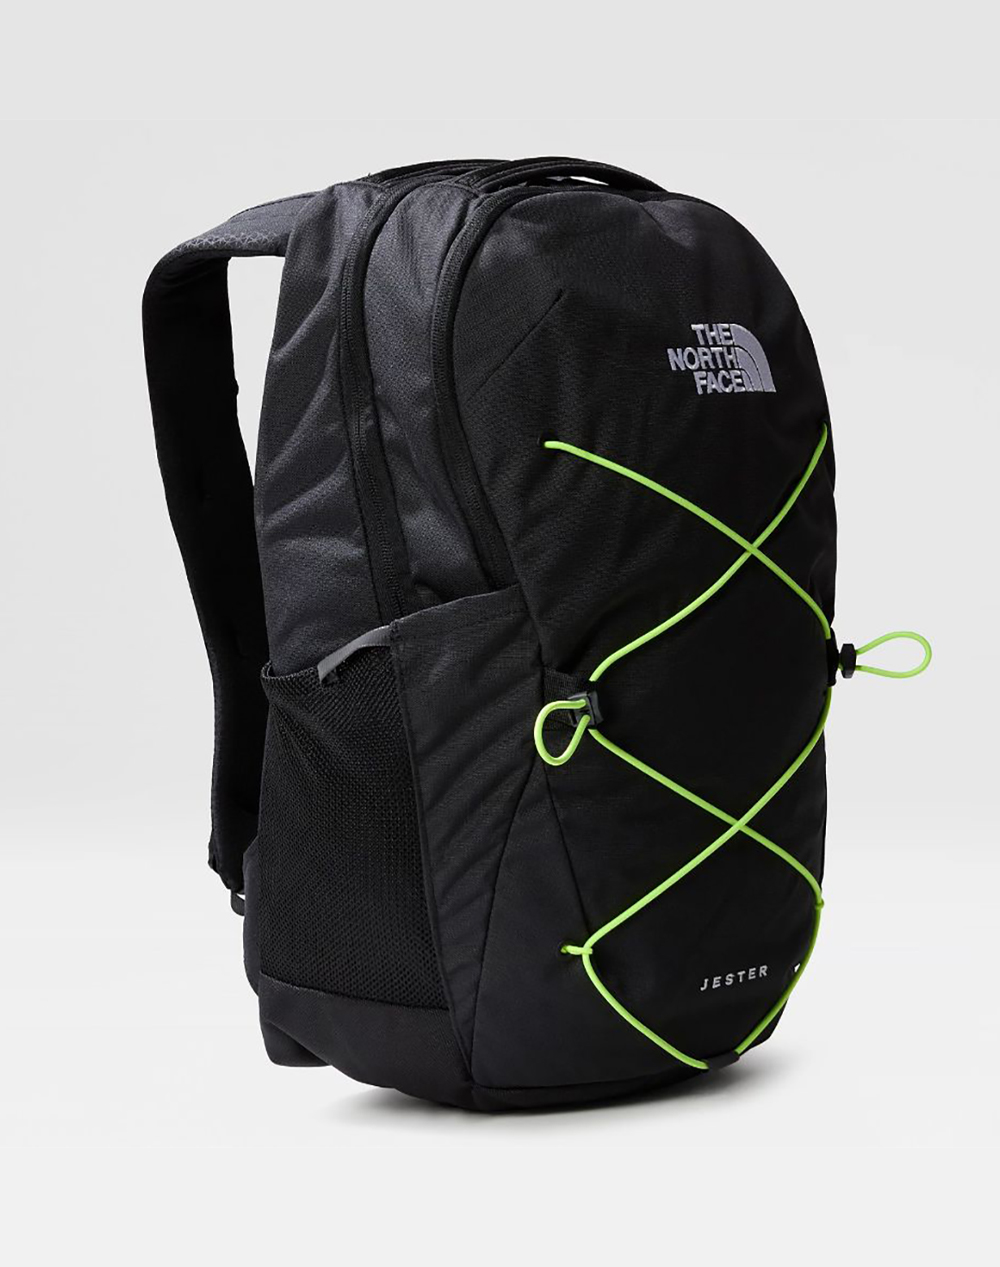 THE NORTH FACE JESTER BACKPACK Διαστάσεις 28 x 21 x 46 εκ NF0A3VXFNFIC4 JetBlack